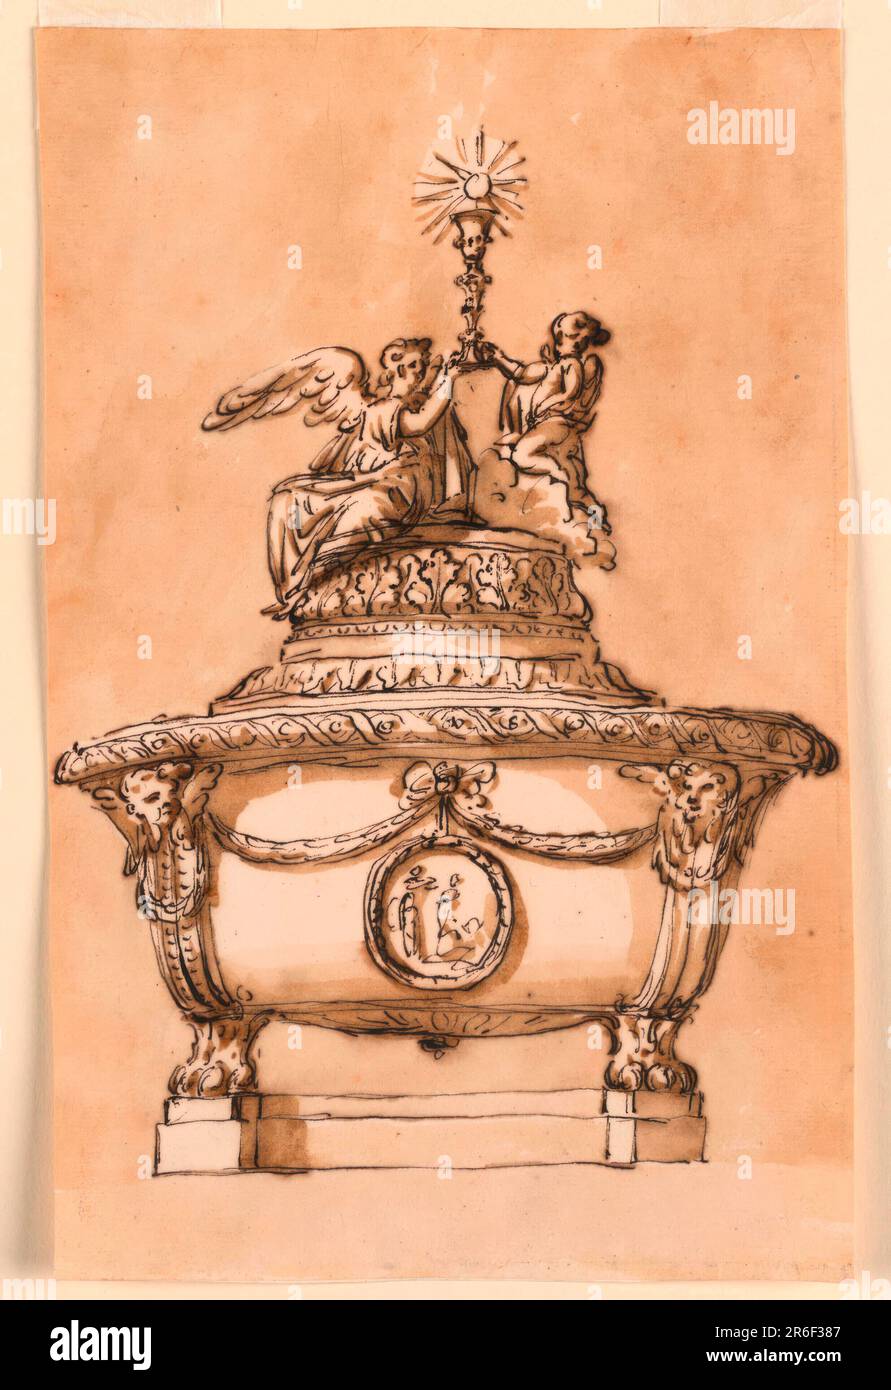 The circular bowl is supported by lion feet, two are visible upon two plinths. From the feet rise volutes with cherubim on top. In the center, above the front, is a bowknot from which hang a circular medallion with the representation of the baptism of Christ, and festoons toward the below the cherubim. The lif is framed by a round base, with a group of sitting and kneeling angels upon clouds together supporting a high chalice with the host hovering above it. Usual background. Date: ca. 1775. Pen and brown ink, brush and brown wash on lined off-white laid paper. Museum: Cooper Hewitt, Smithsoni Stock Photo